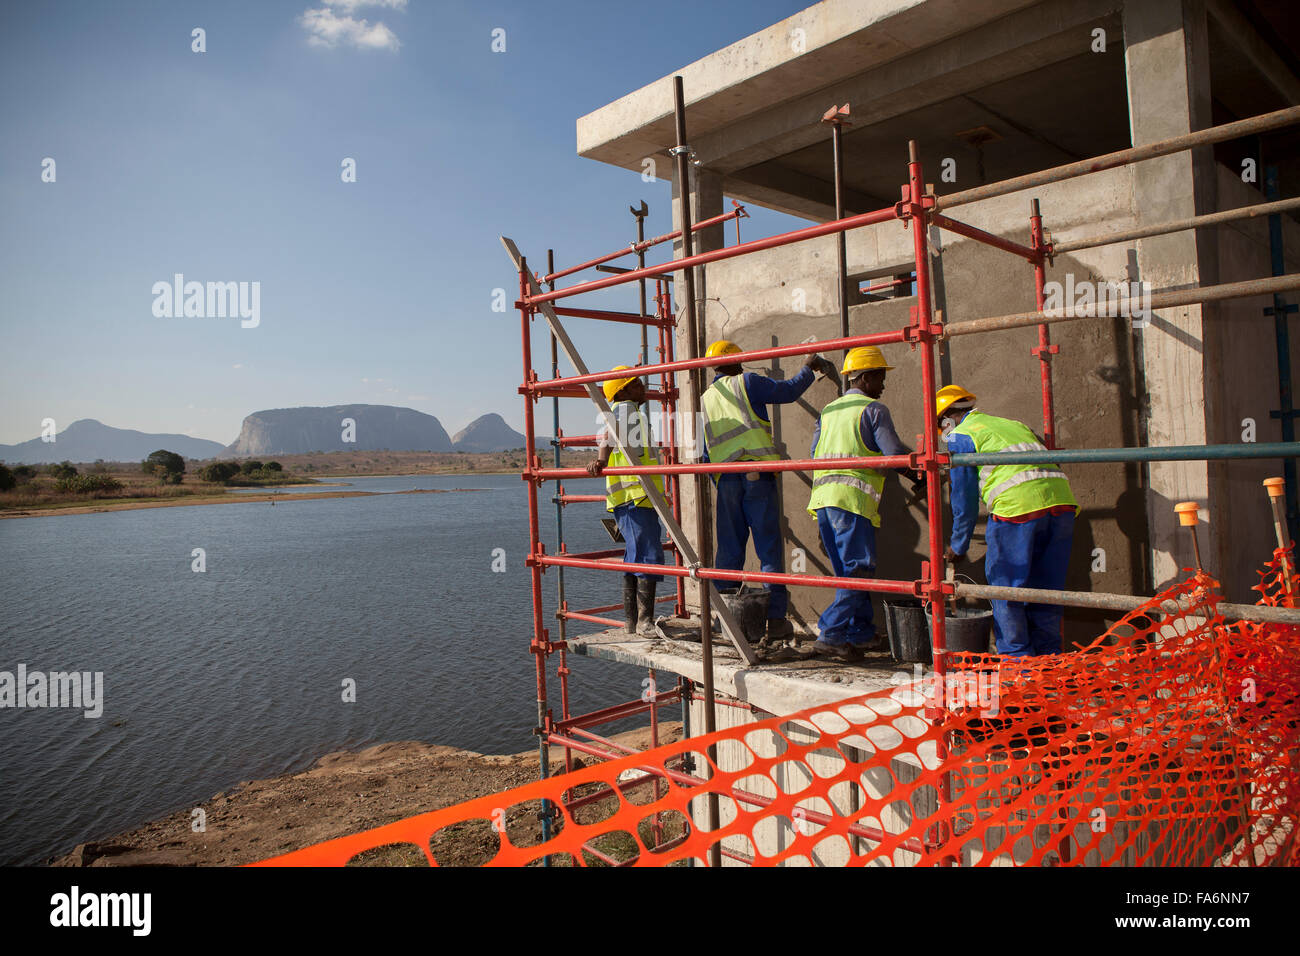 Workers construct a new water pumphouse along the Manapo Dam in Nampula, Mozambique. Stock Photo